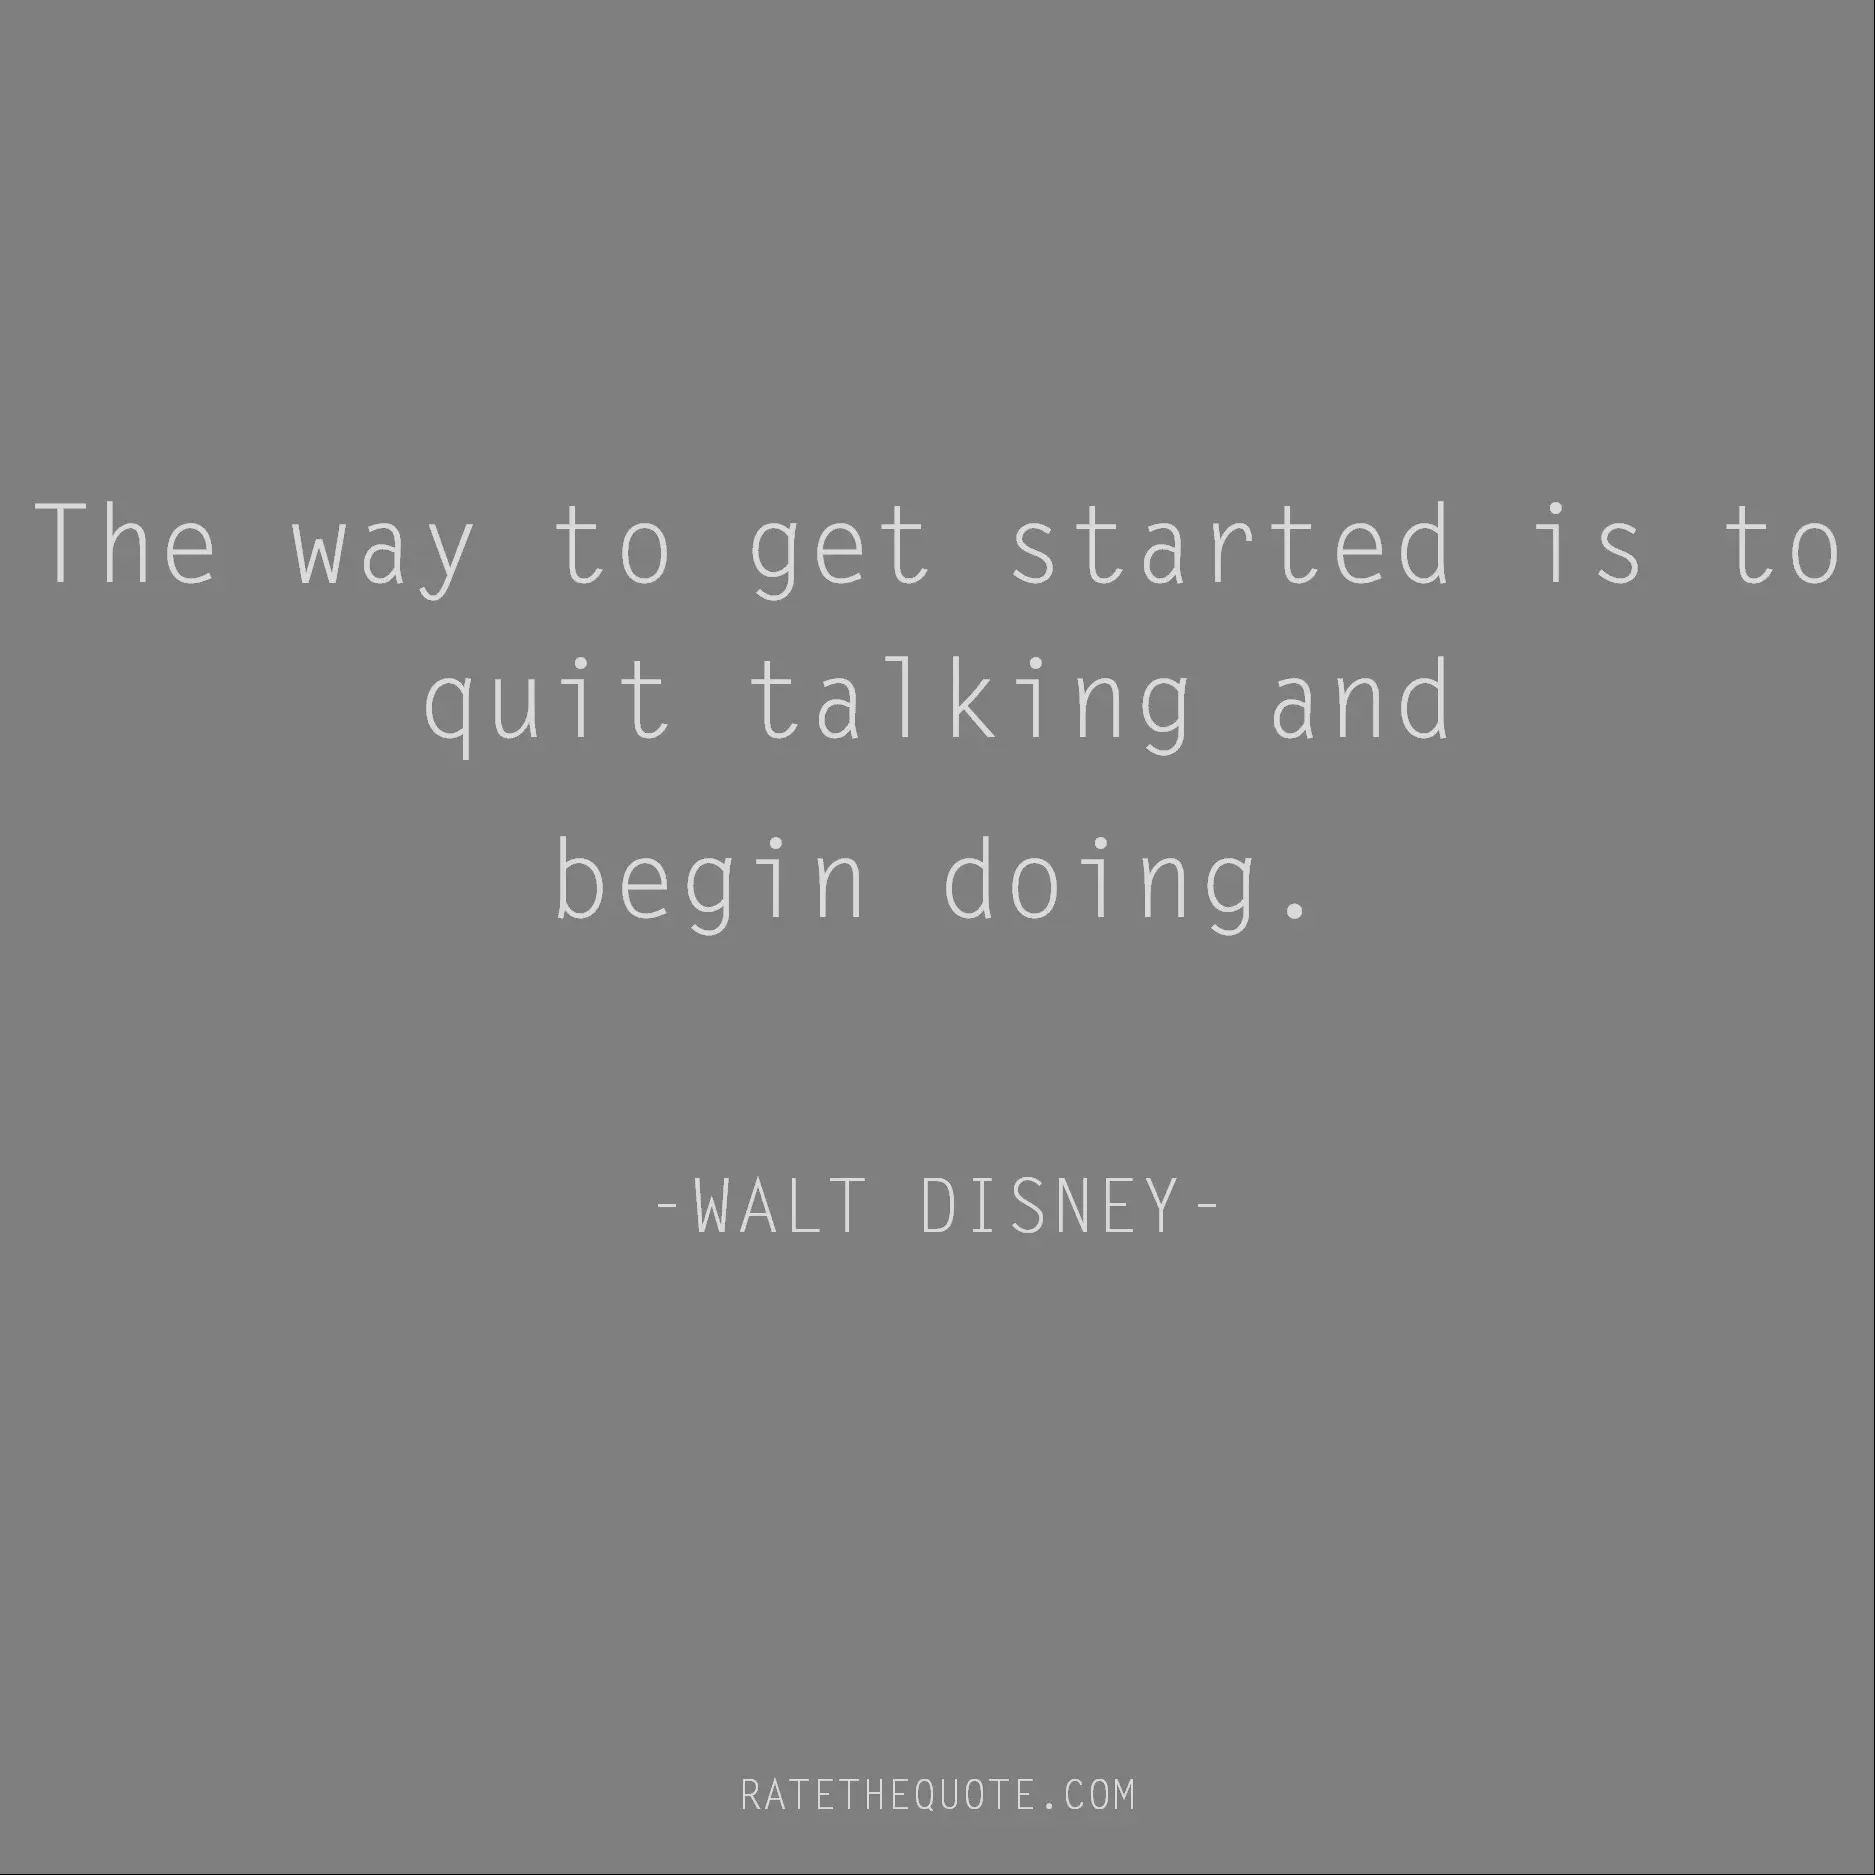 Motivational Quotes The way to get started is to quit talking and begin doing. -WALT DISNEY-